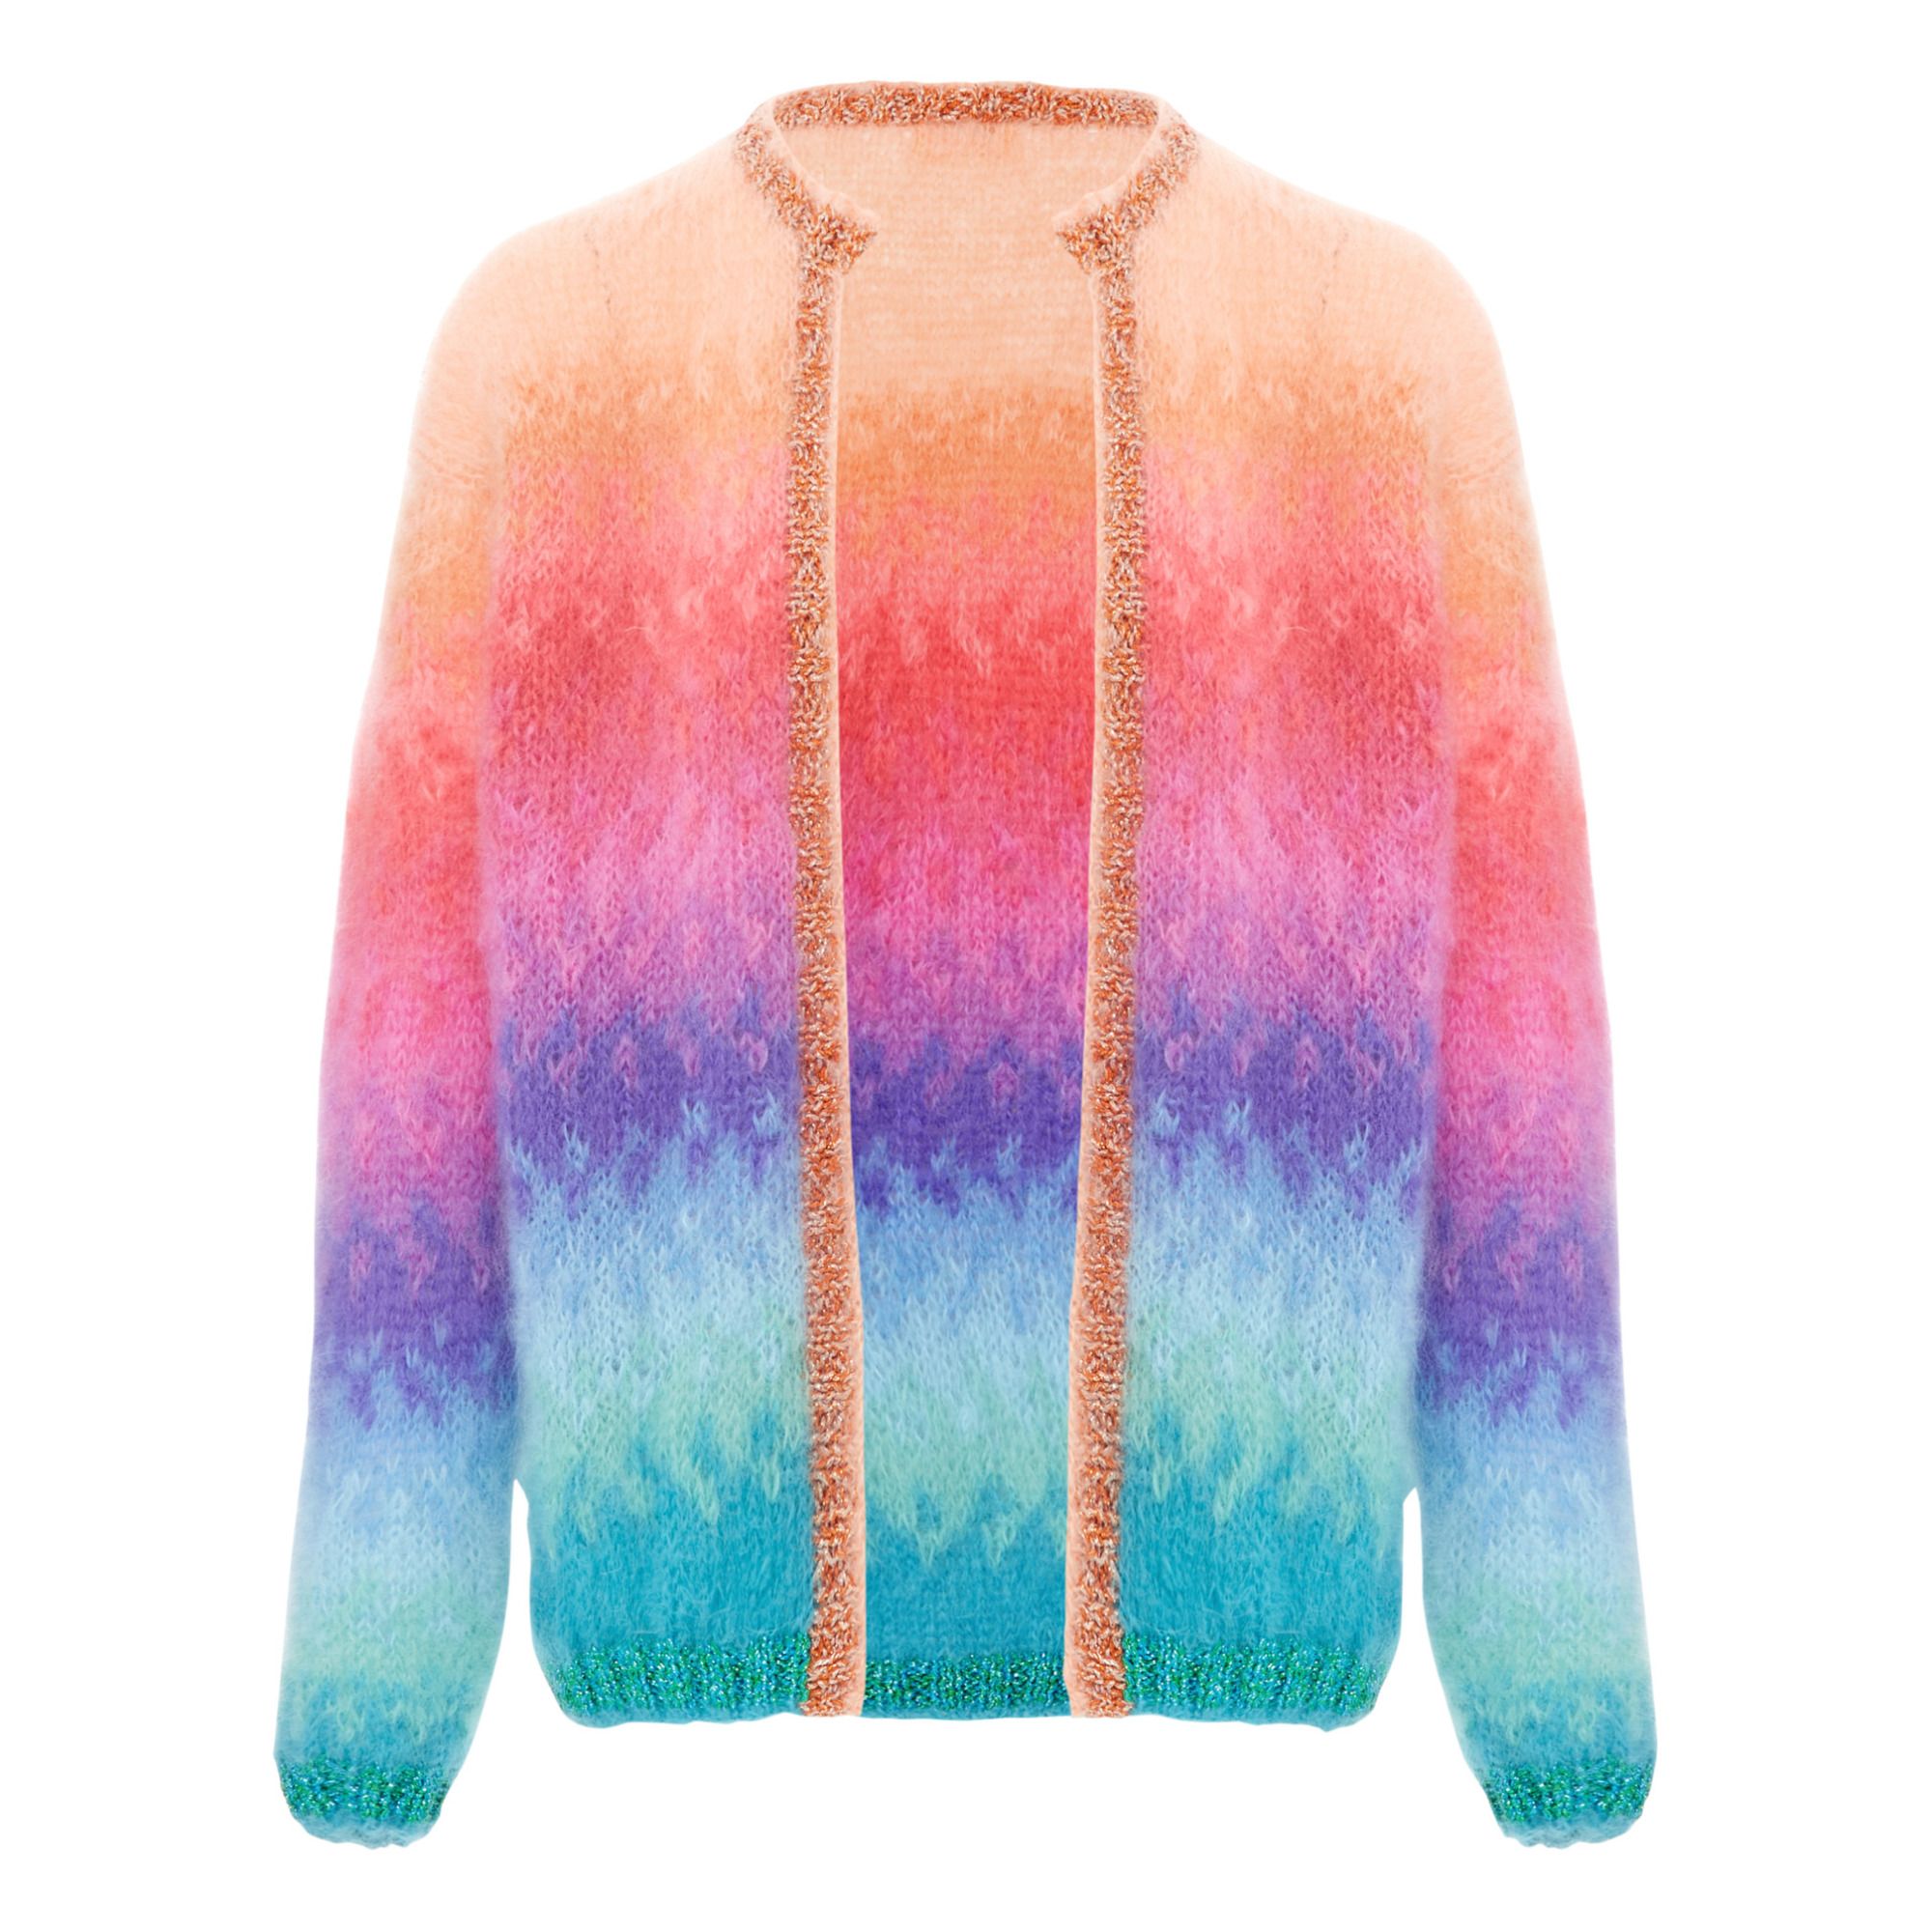 gilet tie and dye pastel